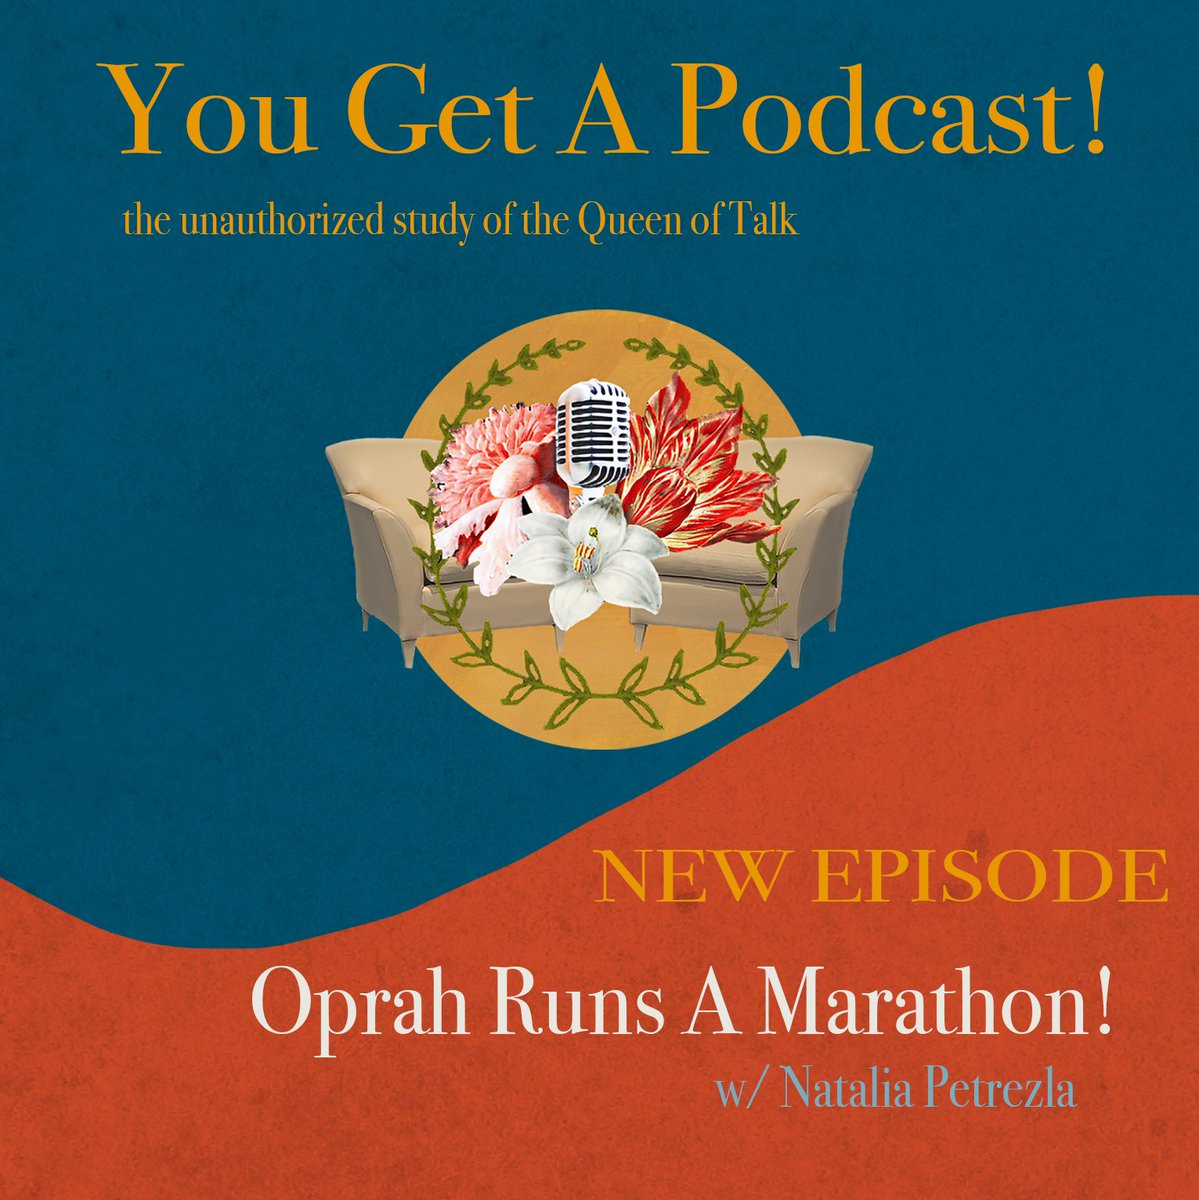 New episode! We look at the time that Oprah Winfrey ran a marathon, and put it in the larger context of how she's talked about fitness, dieting, weight and more. With the brilliant @nataliapetrzela -- a dream guest!